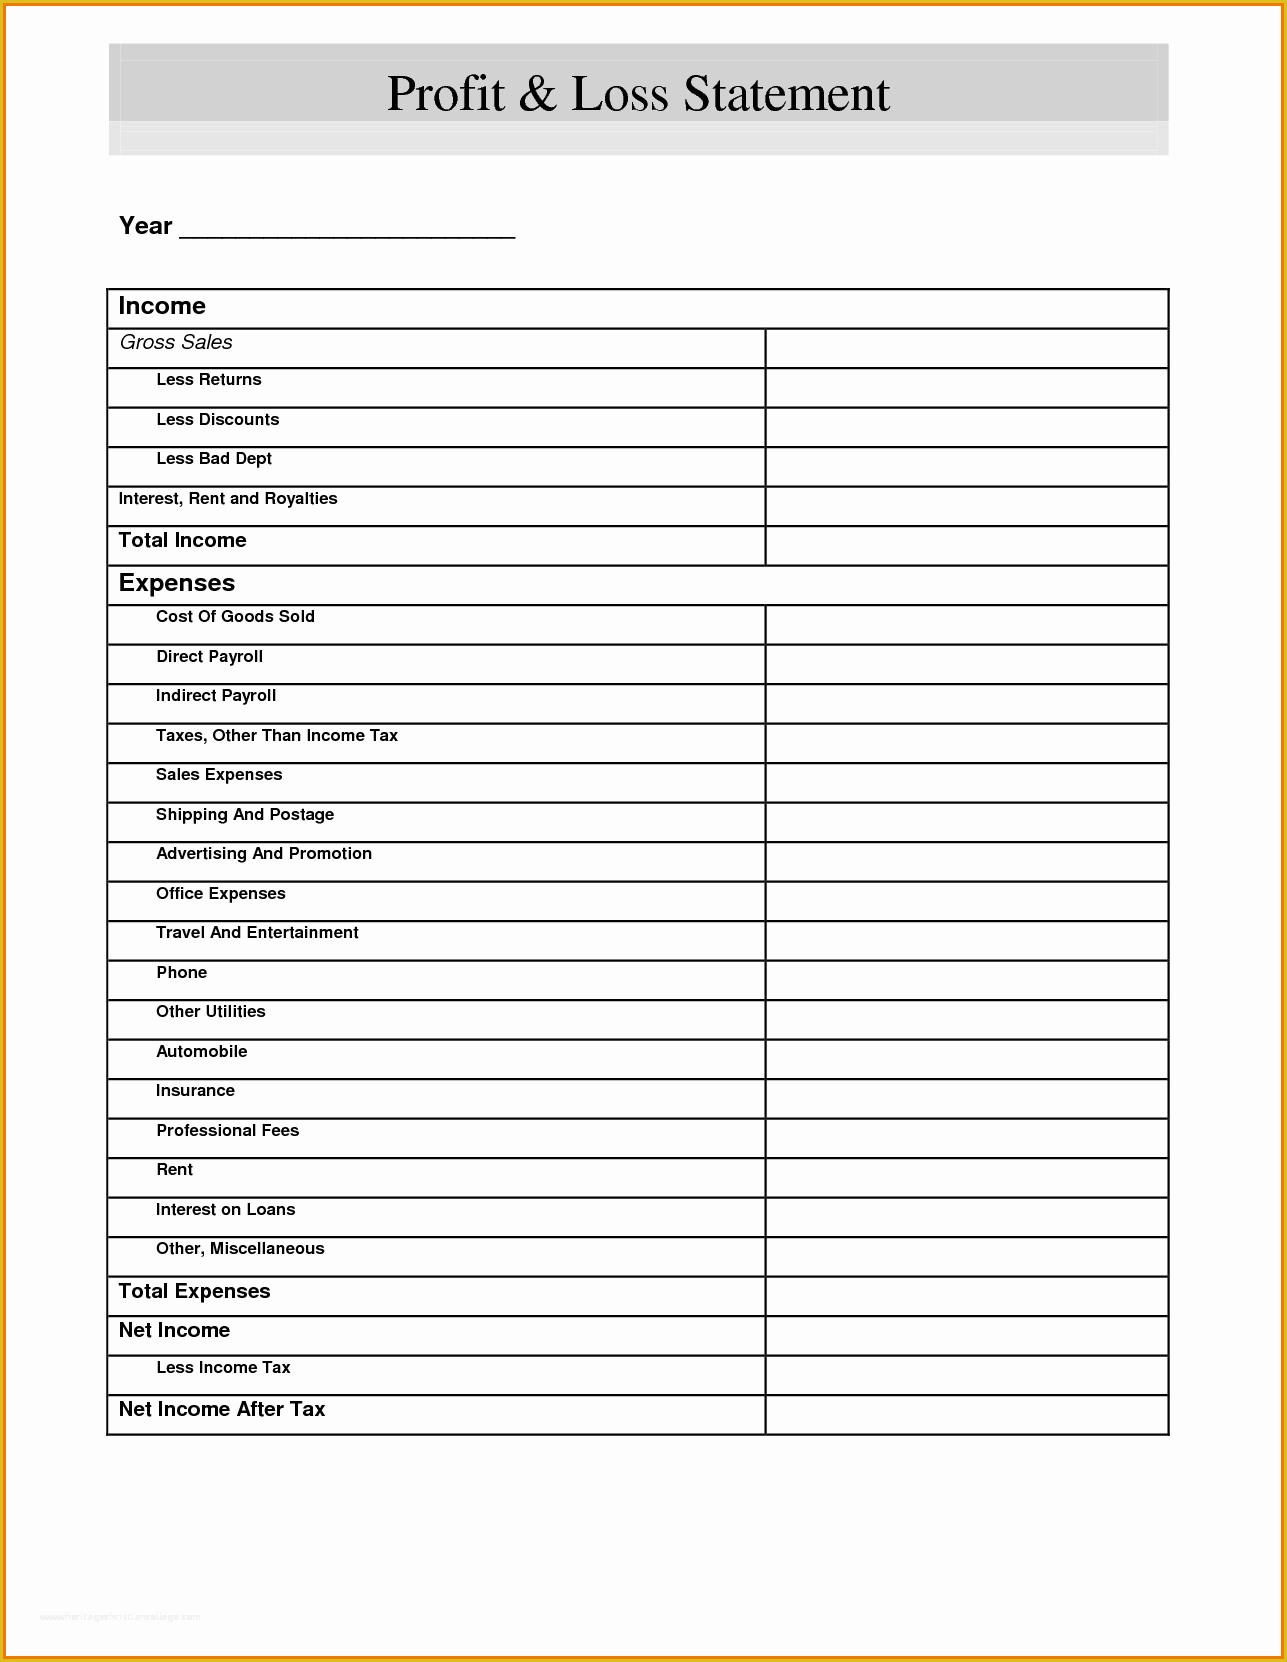 Profit and Loss Statement Template Free Download Of Profit and Loss Statement Template Free Download